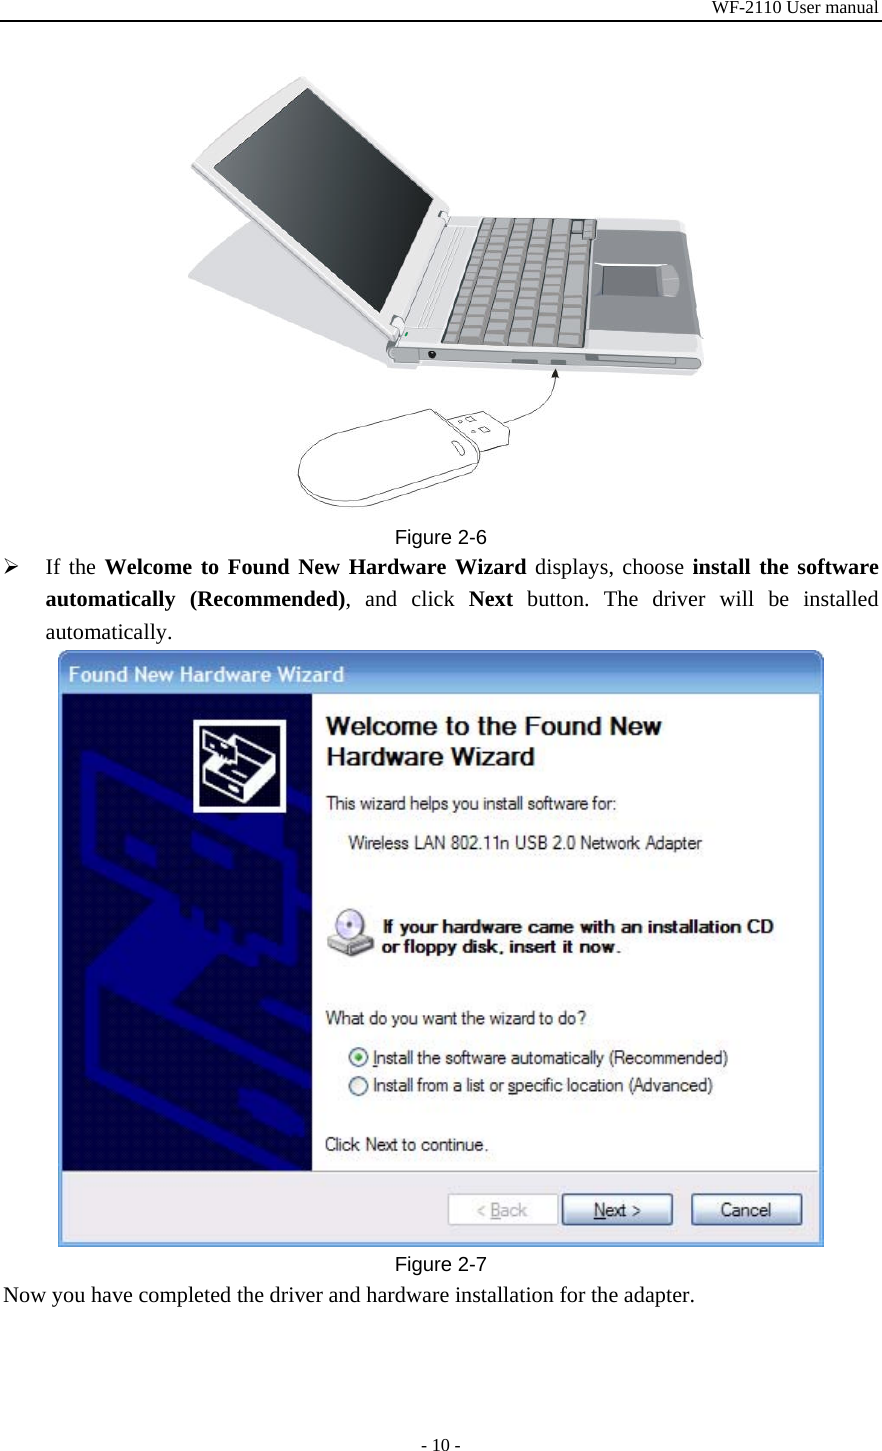 WF-2110 User manual - 10 -  Figure 2-6 ¾ If the Welcome to Found New Hardware Wizard displays, choose install the software automatically (Recommended), and click Next button. The driver will be installed automatically.  Figure 2-7 Now you have completed the driver and hardware installation for the adapter. 